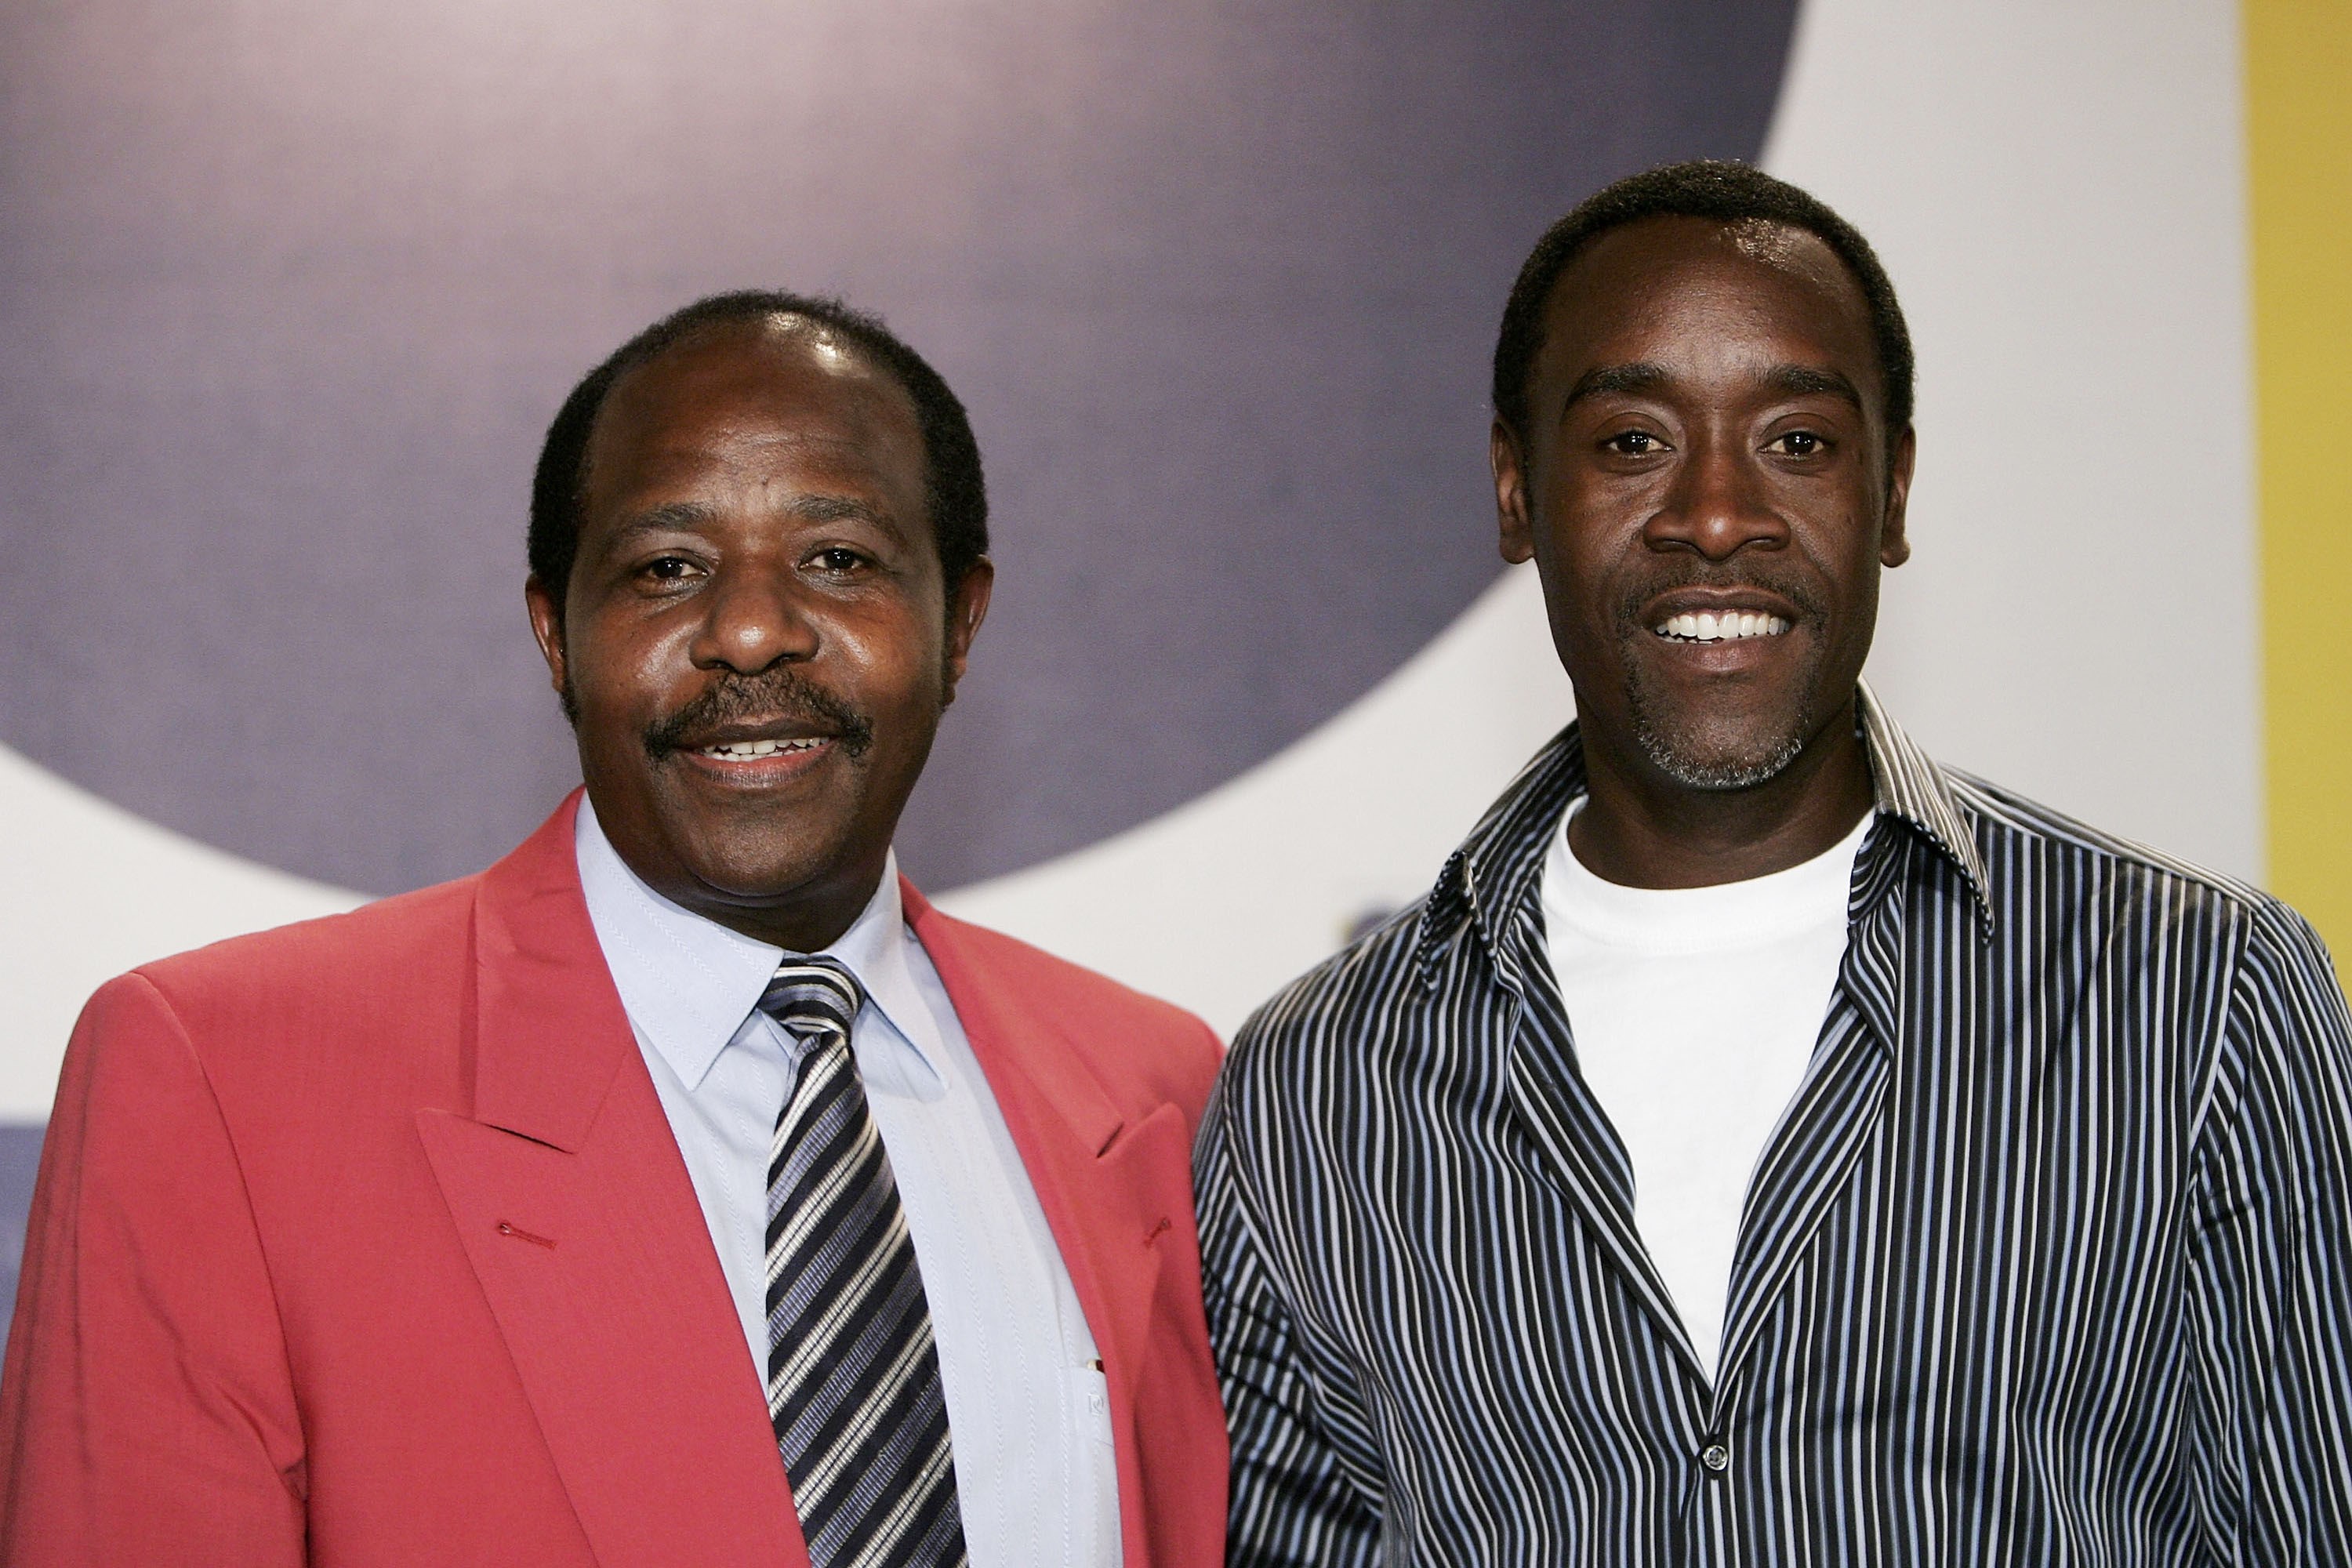 Paul Rusesabagina, in a pink suit with a white shirt and tie, and Don Cheadle in a blue shirt, attend the Berlin International Film Festival for their movie 'Hotel Rwanda.'